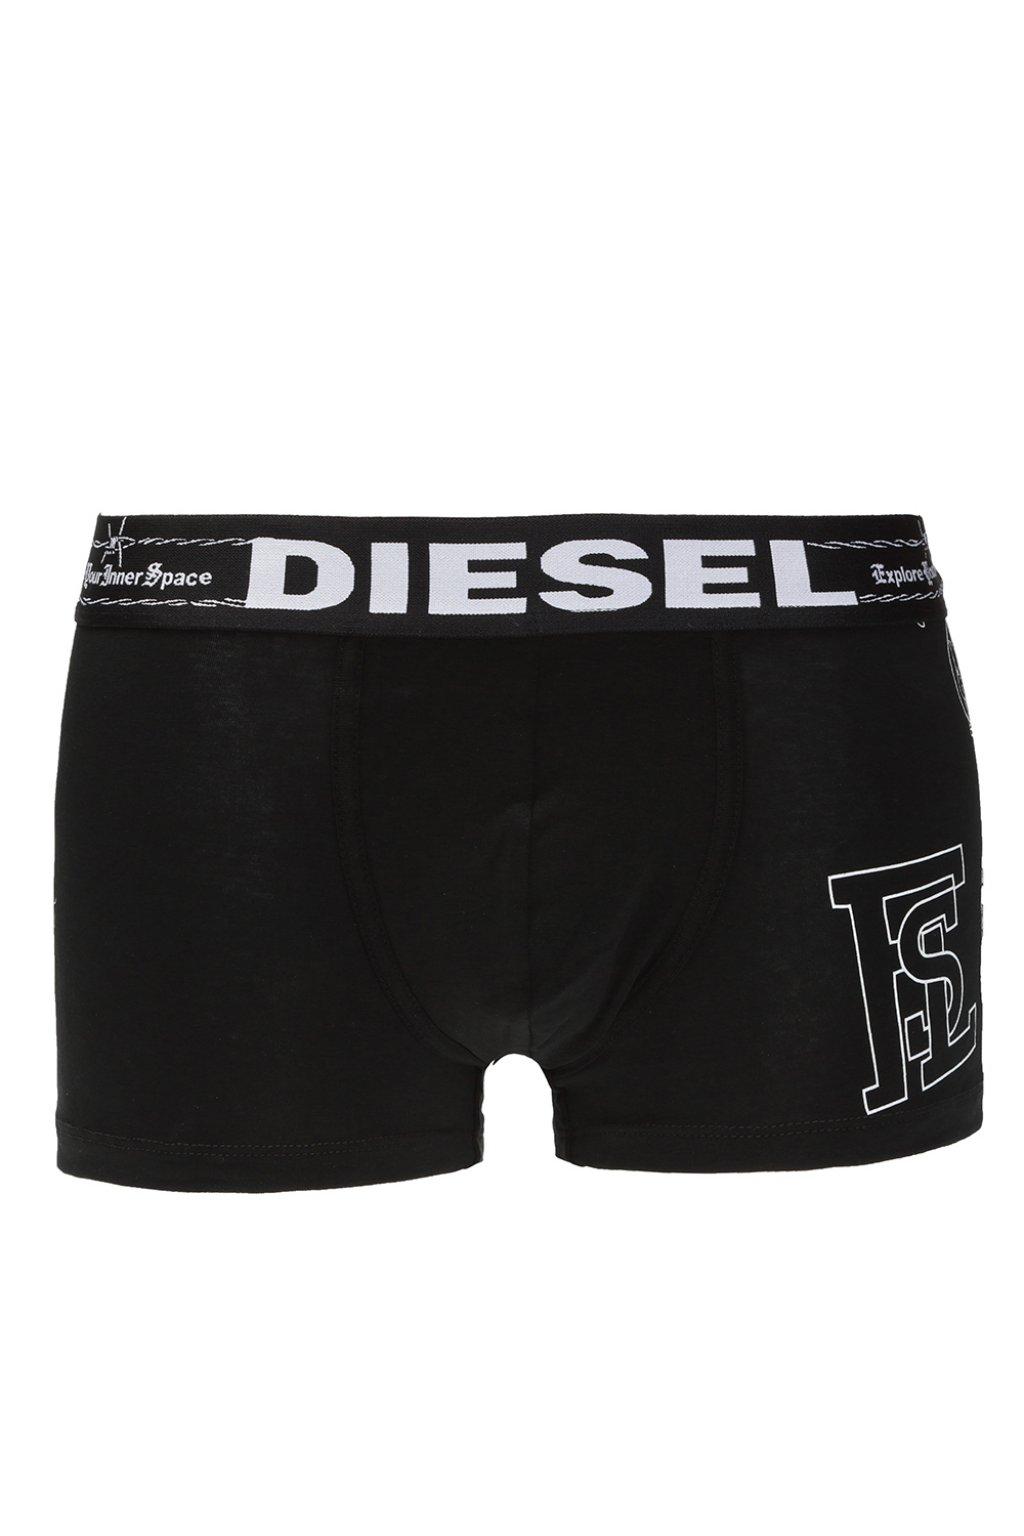 DIESEL Cotton Boxers Three-pack in Black for Men - Save 71% - Lyst